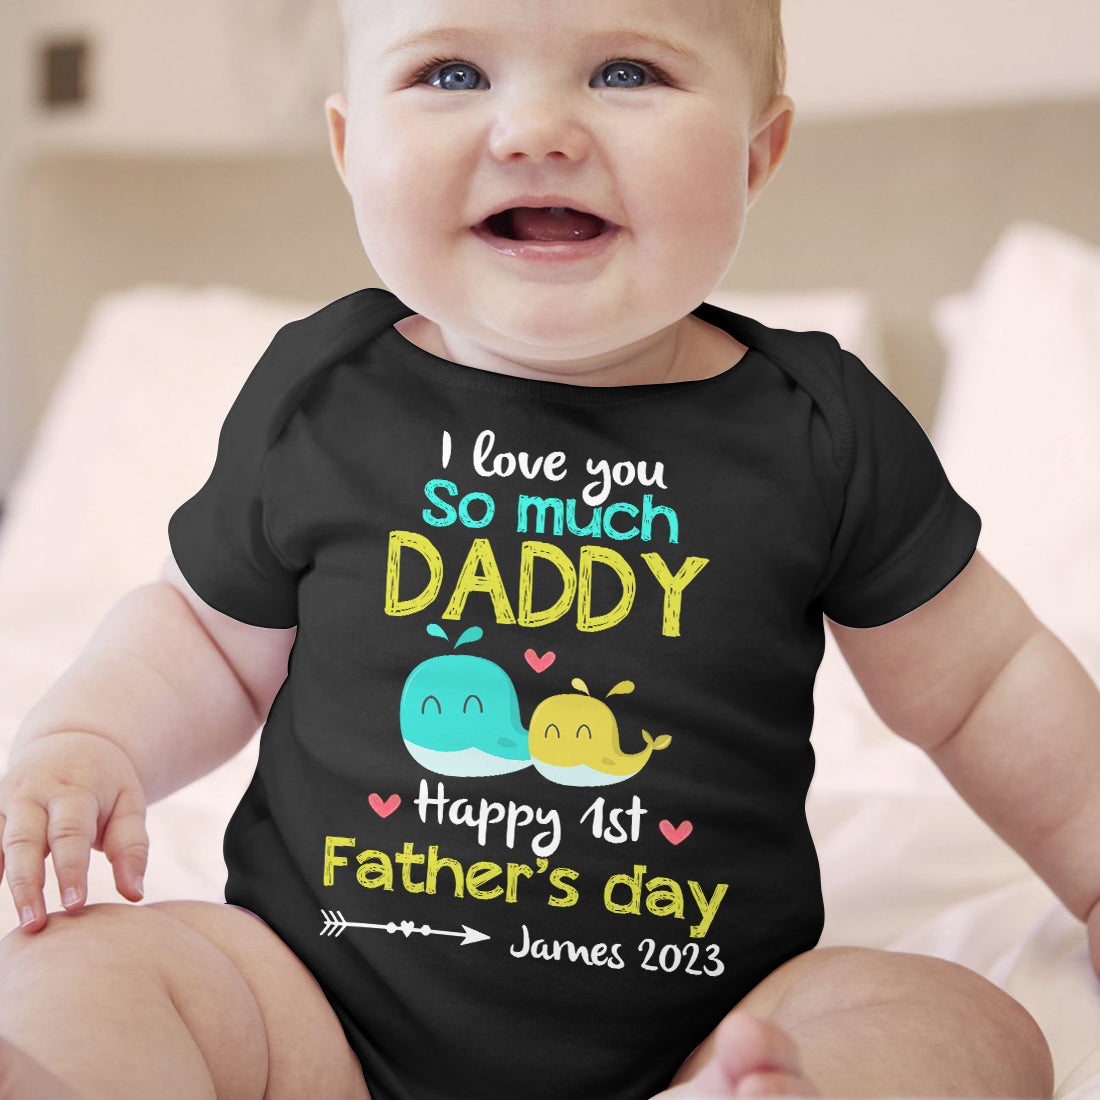 I Love You So Much Daddy Baby Onesie Personalized Father's Day Gift